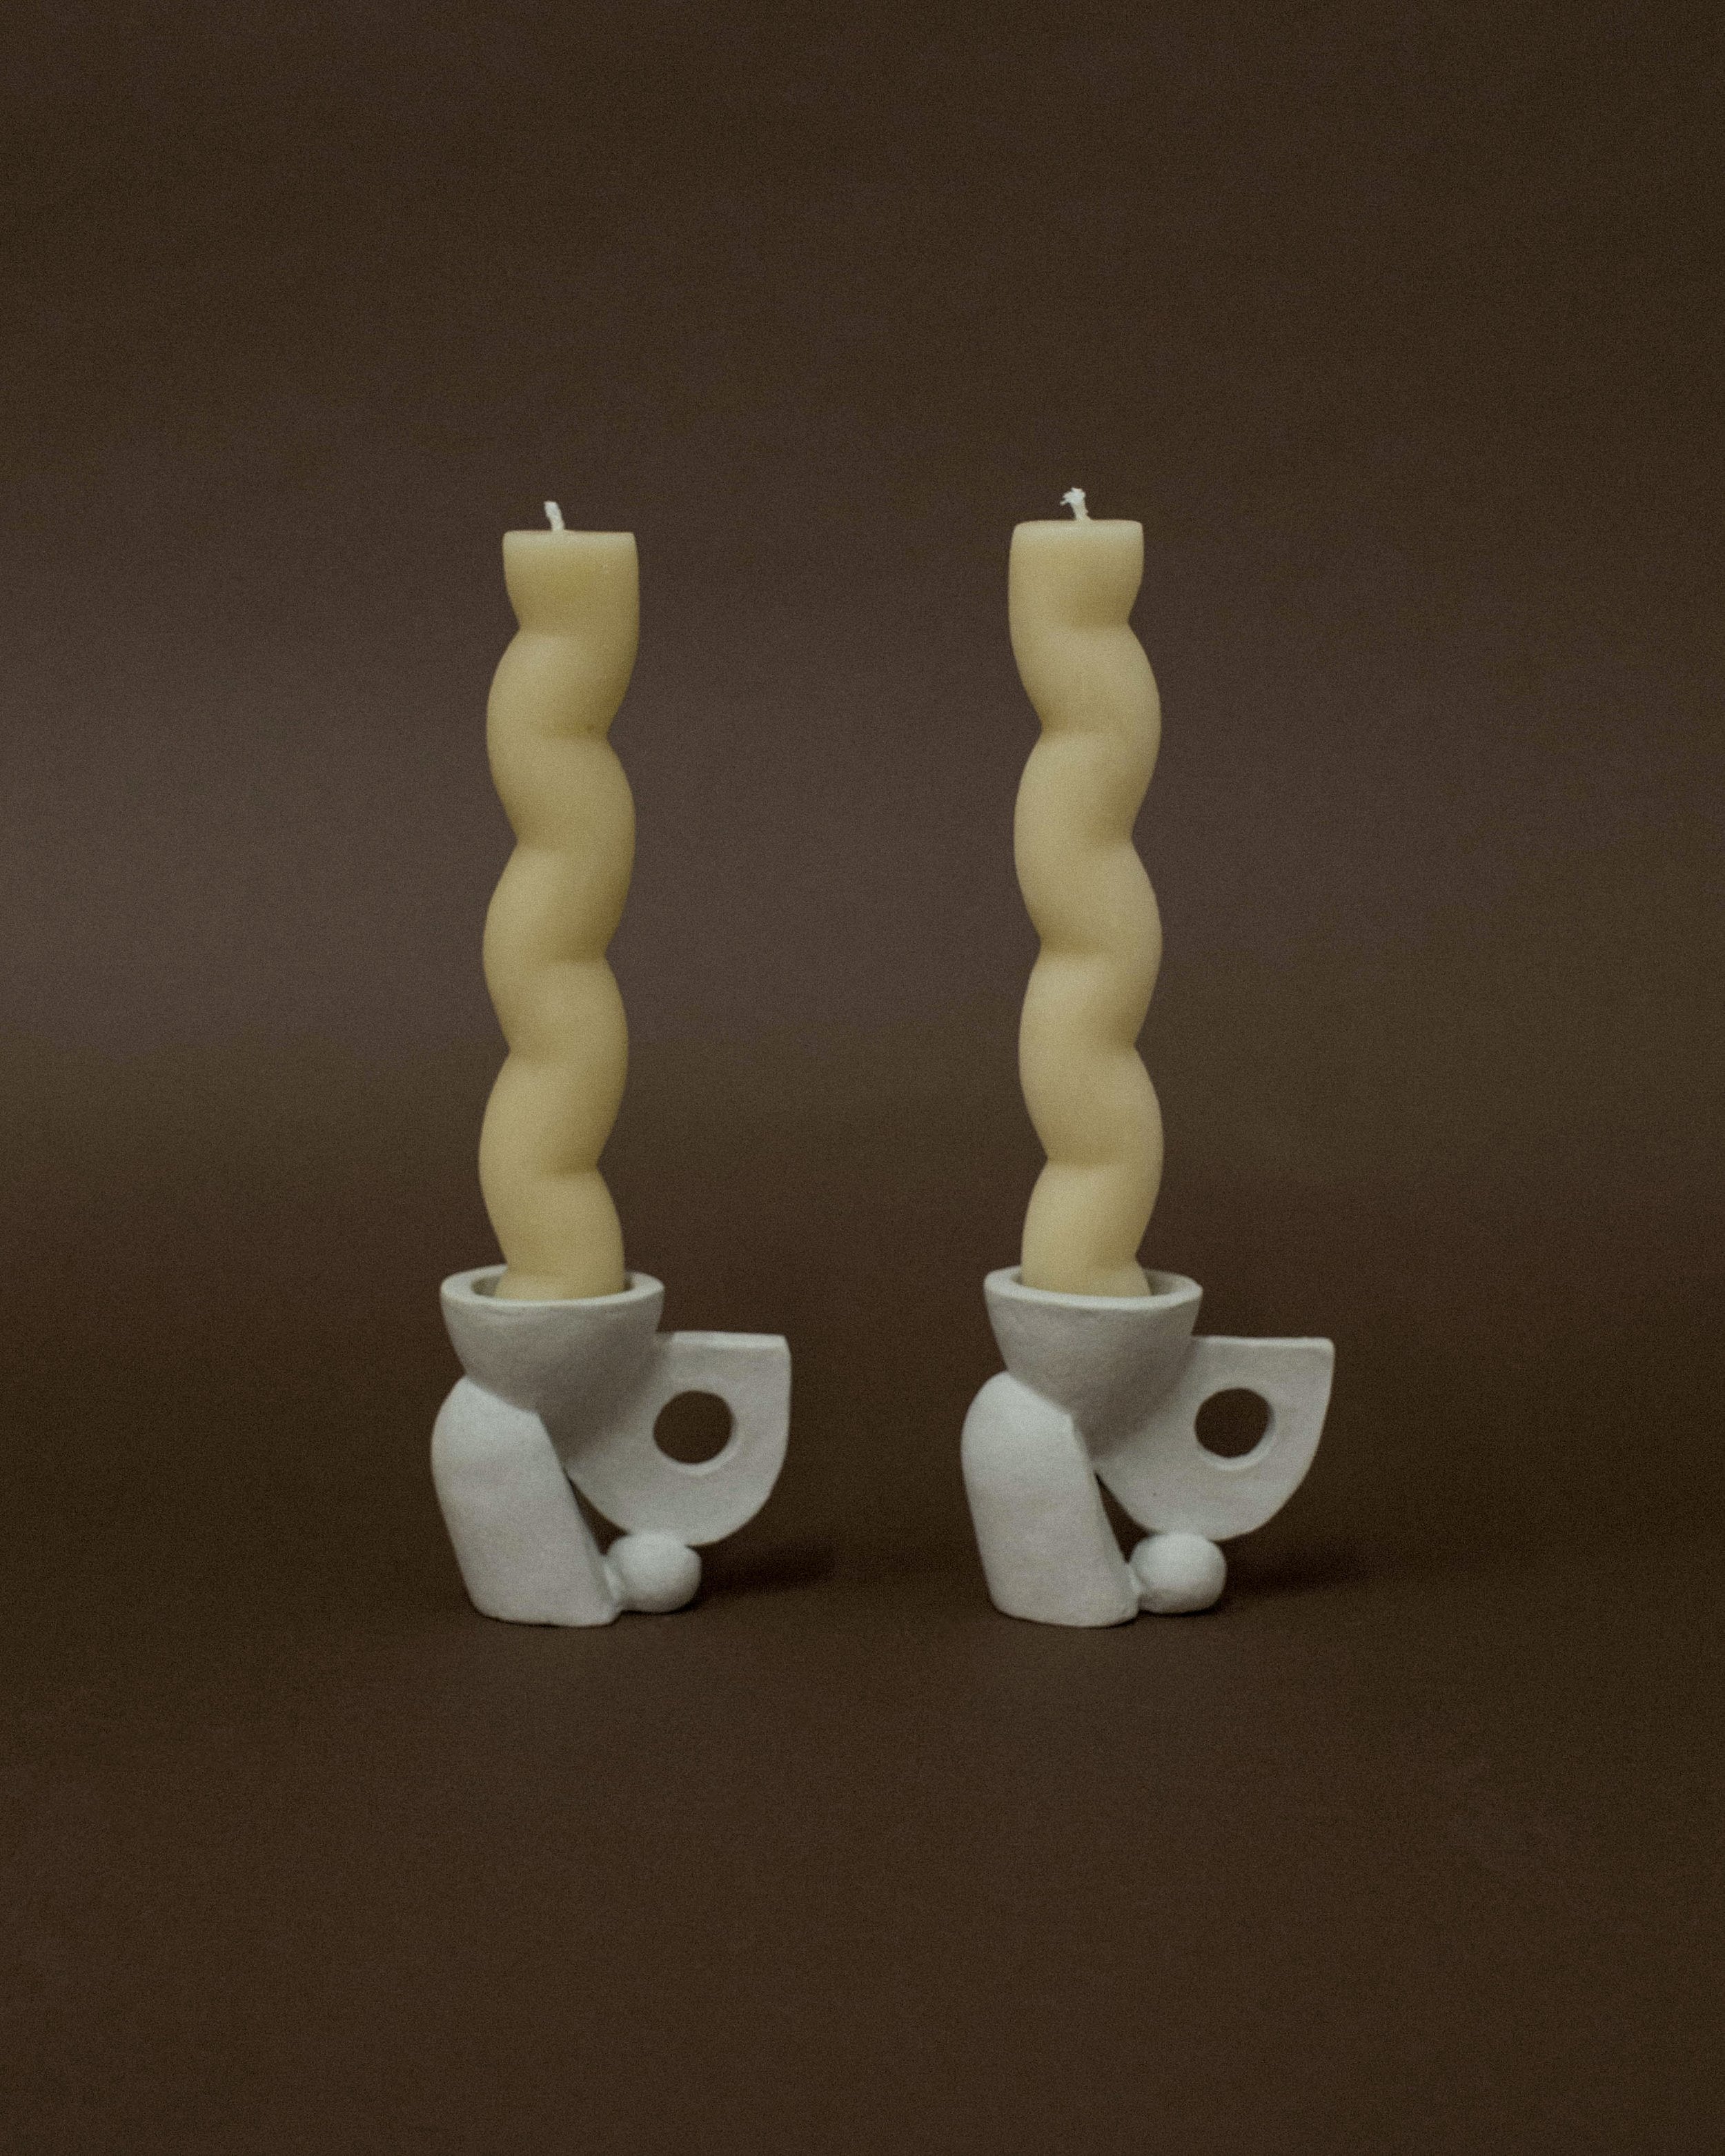 Build Candle Holder Pair. Sculptural abstract candleholders inspired by nature in natural grey ceramic stoneware. 